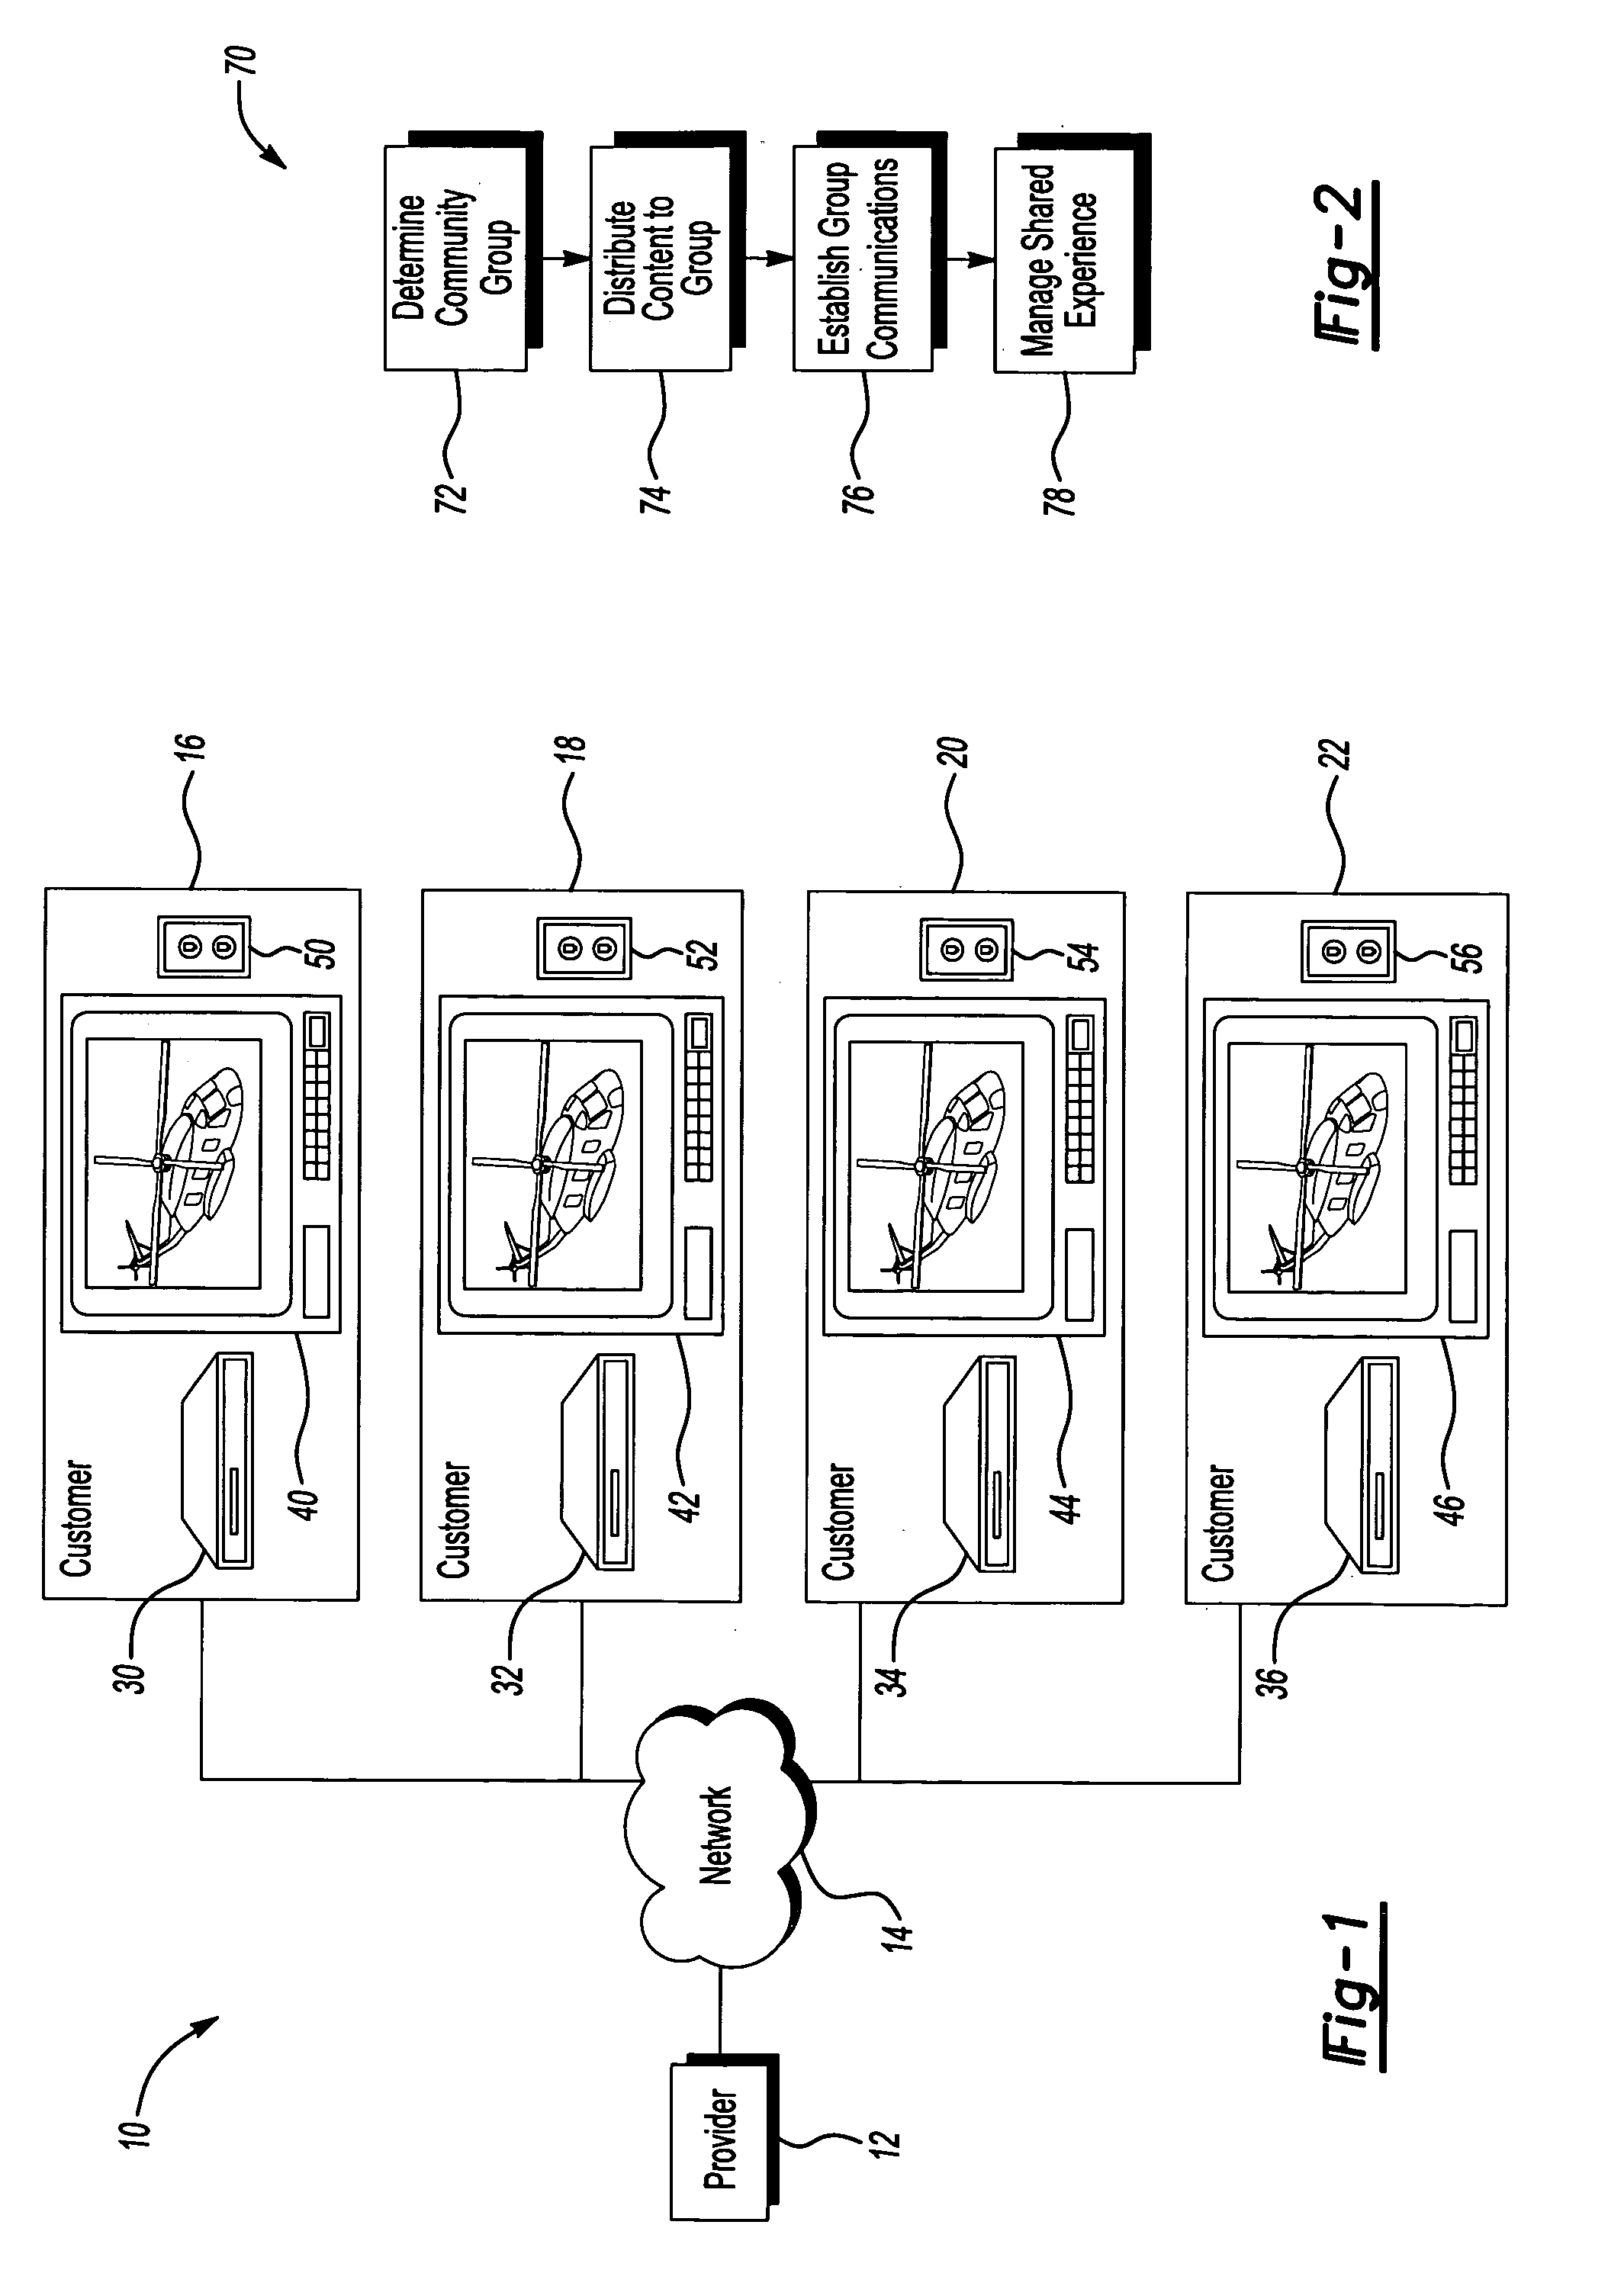 Method and system of providing shared community experience